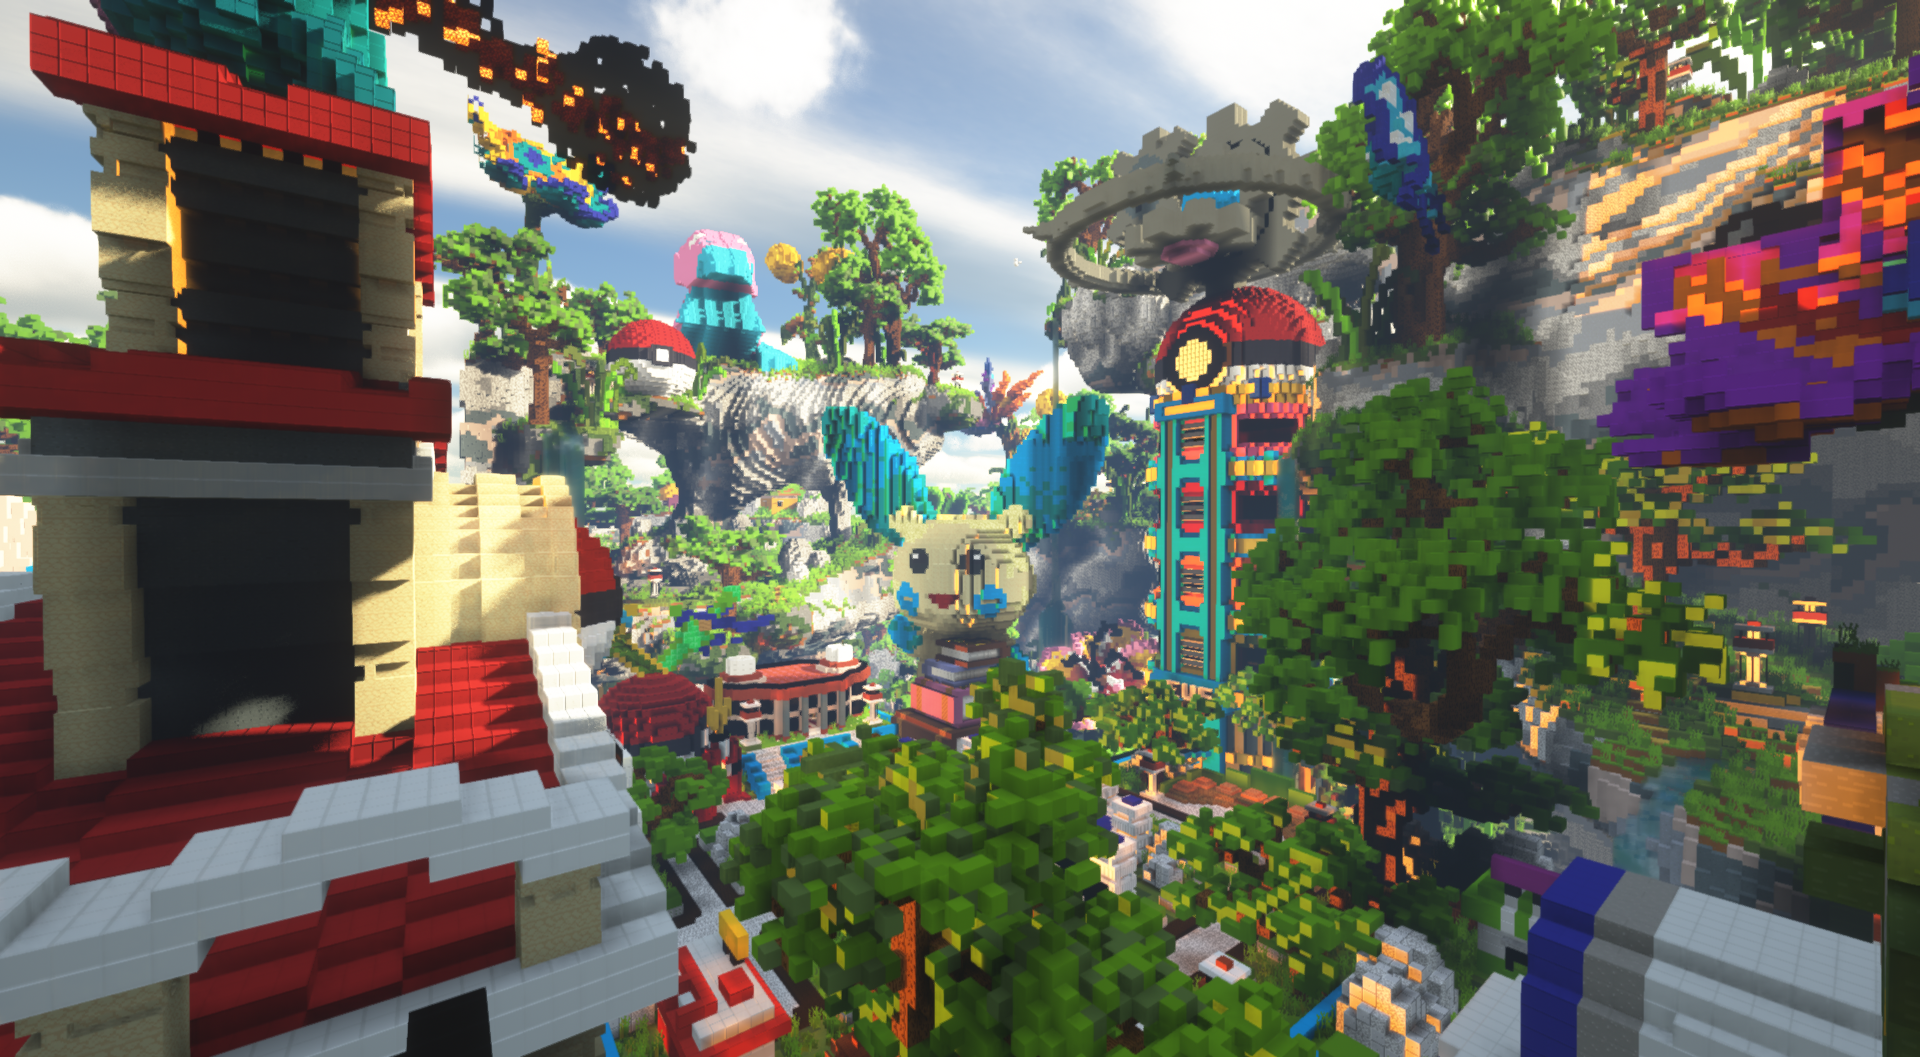 Main image of our spawn that houses many things like shops, lab, crates, and various npcs!